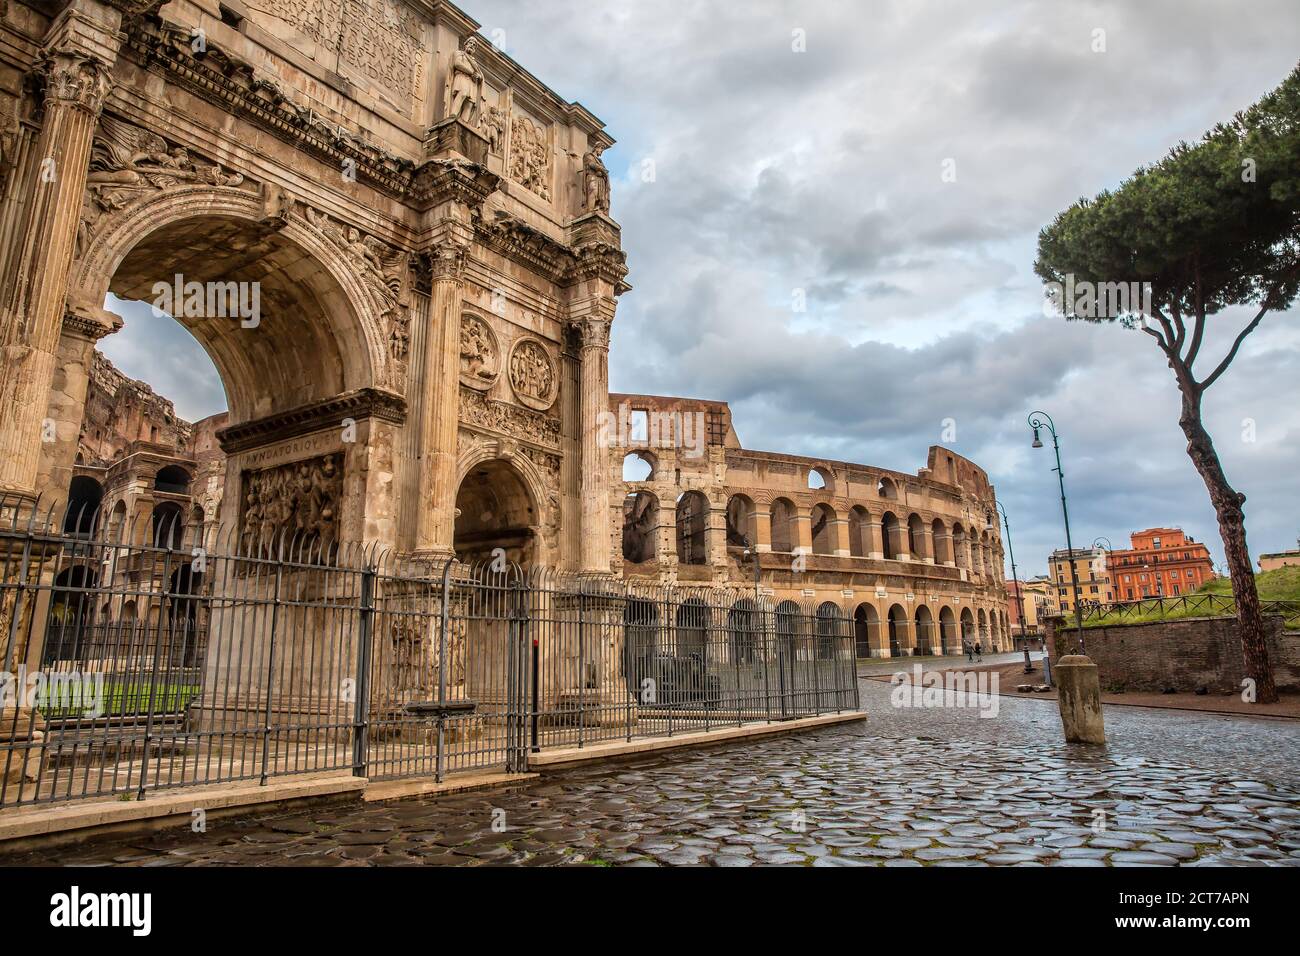 Scenic view of Ancient Roman ruins in the Rome center. The Colosseum and Arch of Constantine in Rome - famous Roman buildings, Rome, Italy Stock Photo